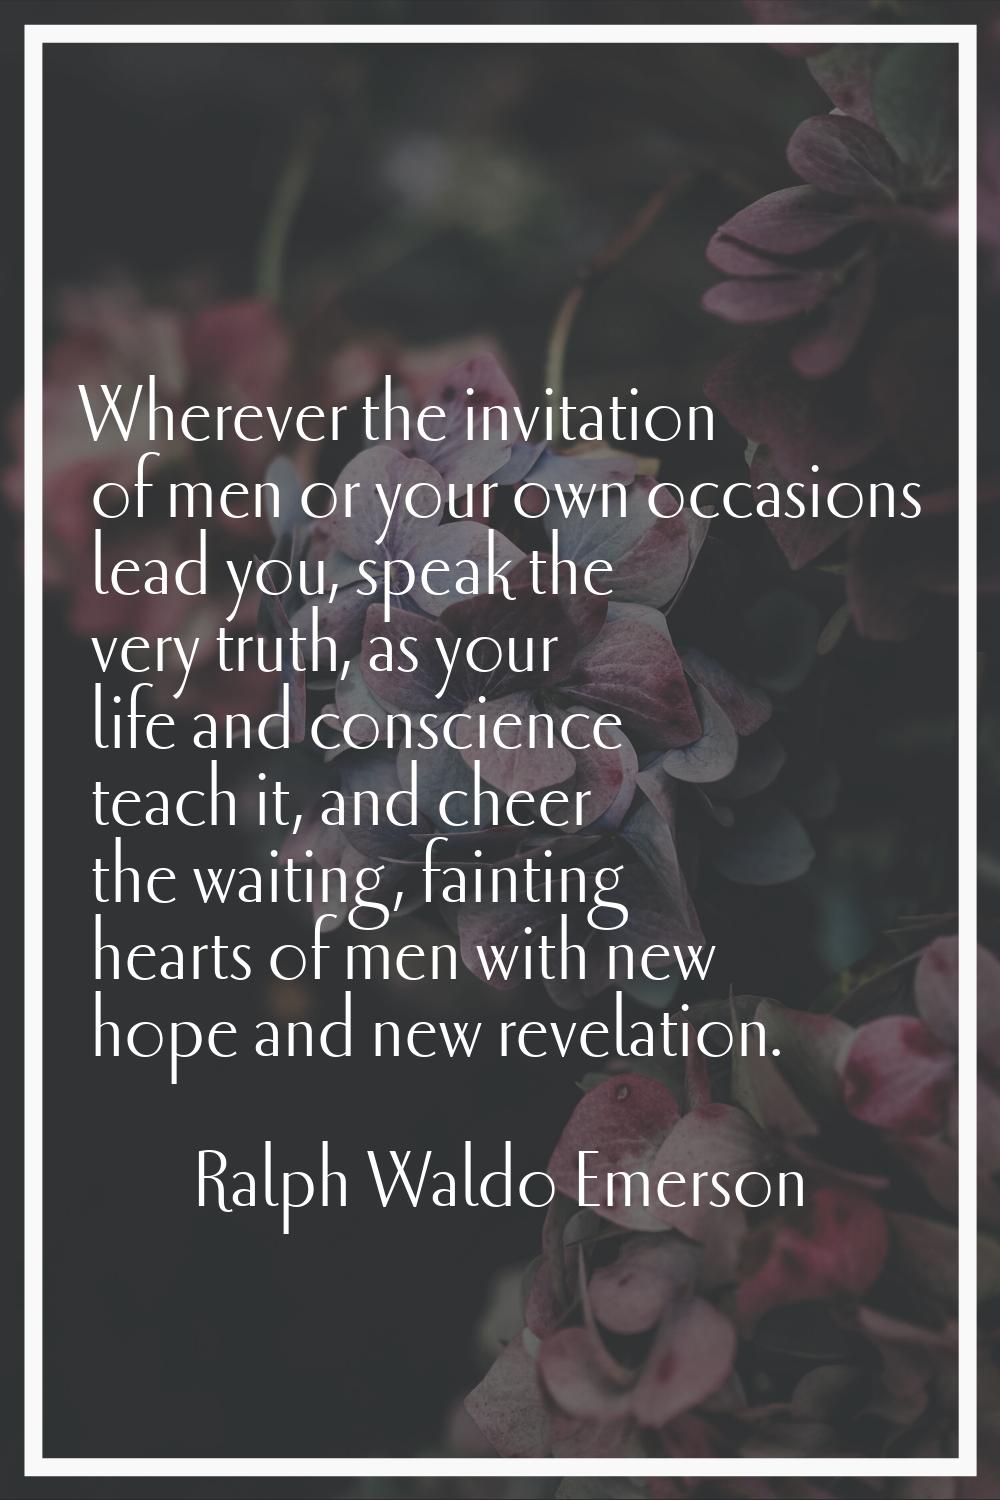 Wherever the invitation of men or your own occasions lead you, speak the very truth, as your life a